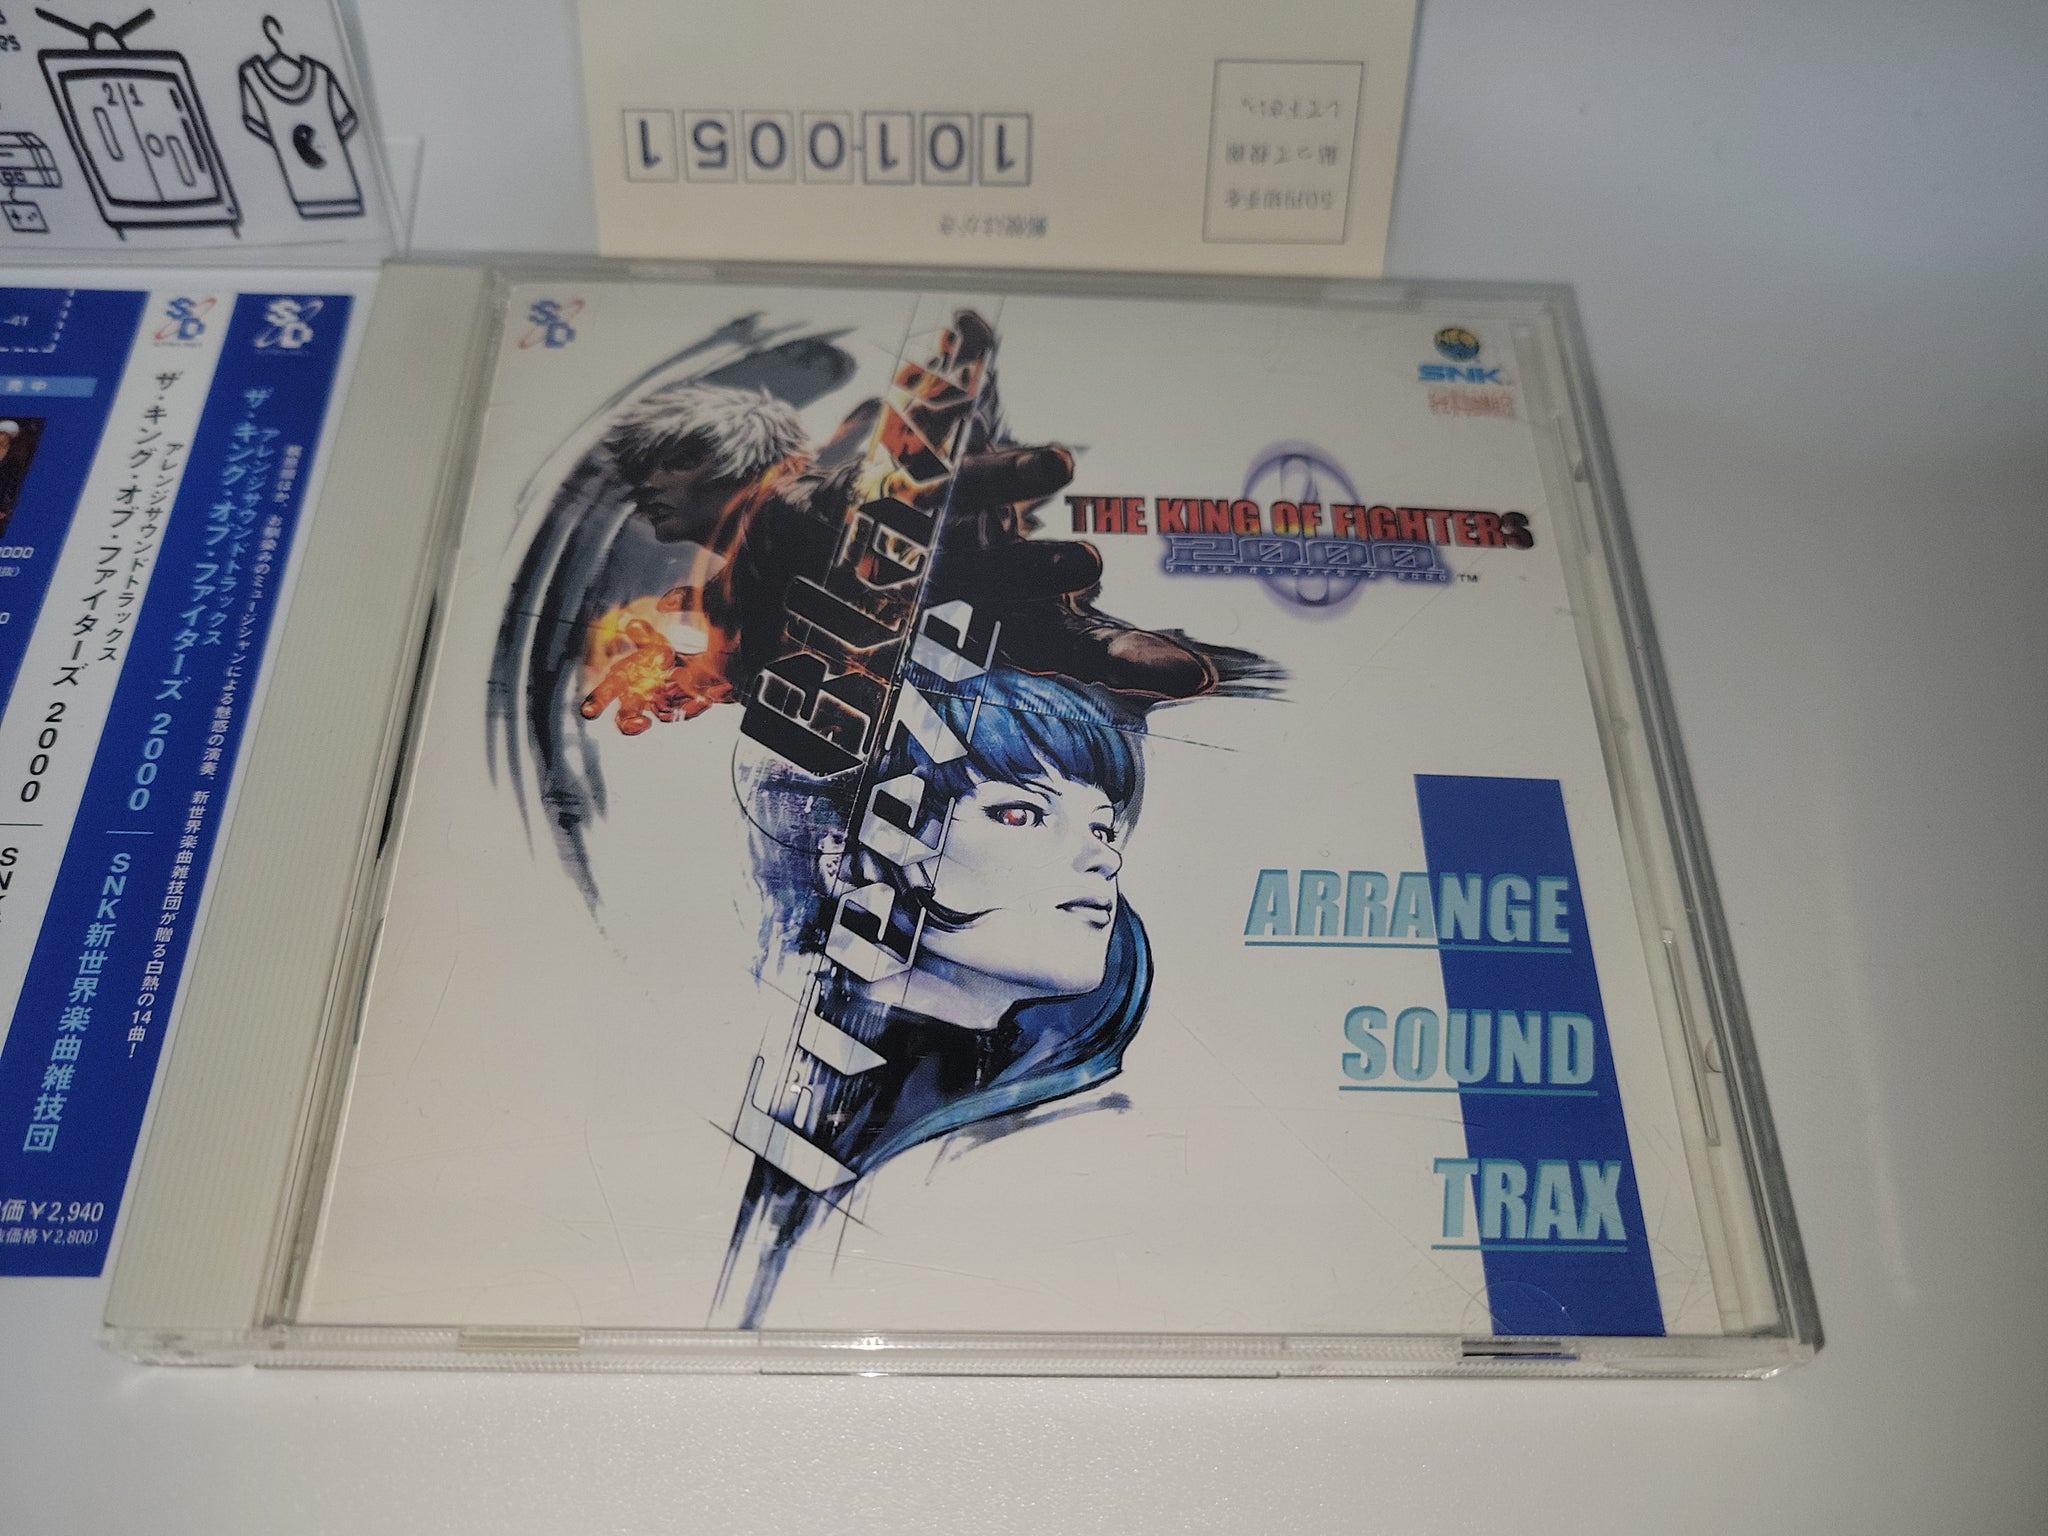 THE KING OF FIGHTERS 2000 ARRANGE SOUND TRAX - Music cd soundtrack